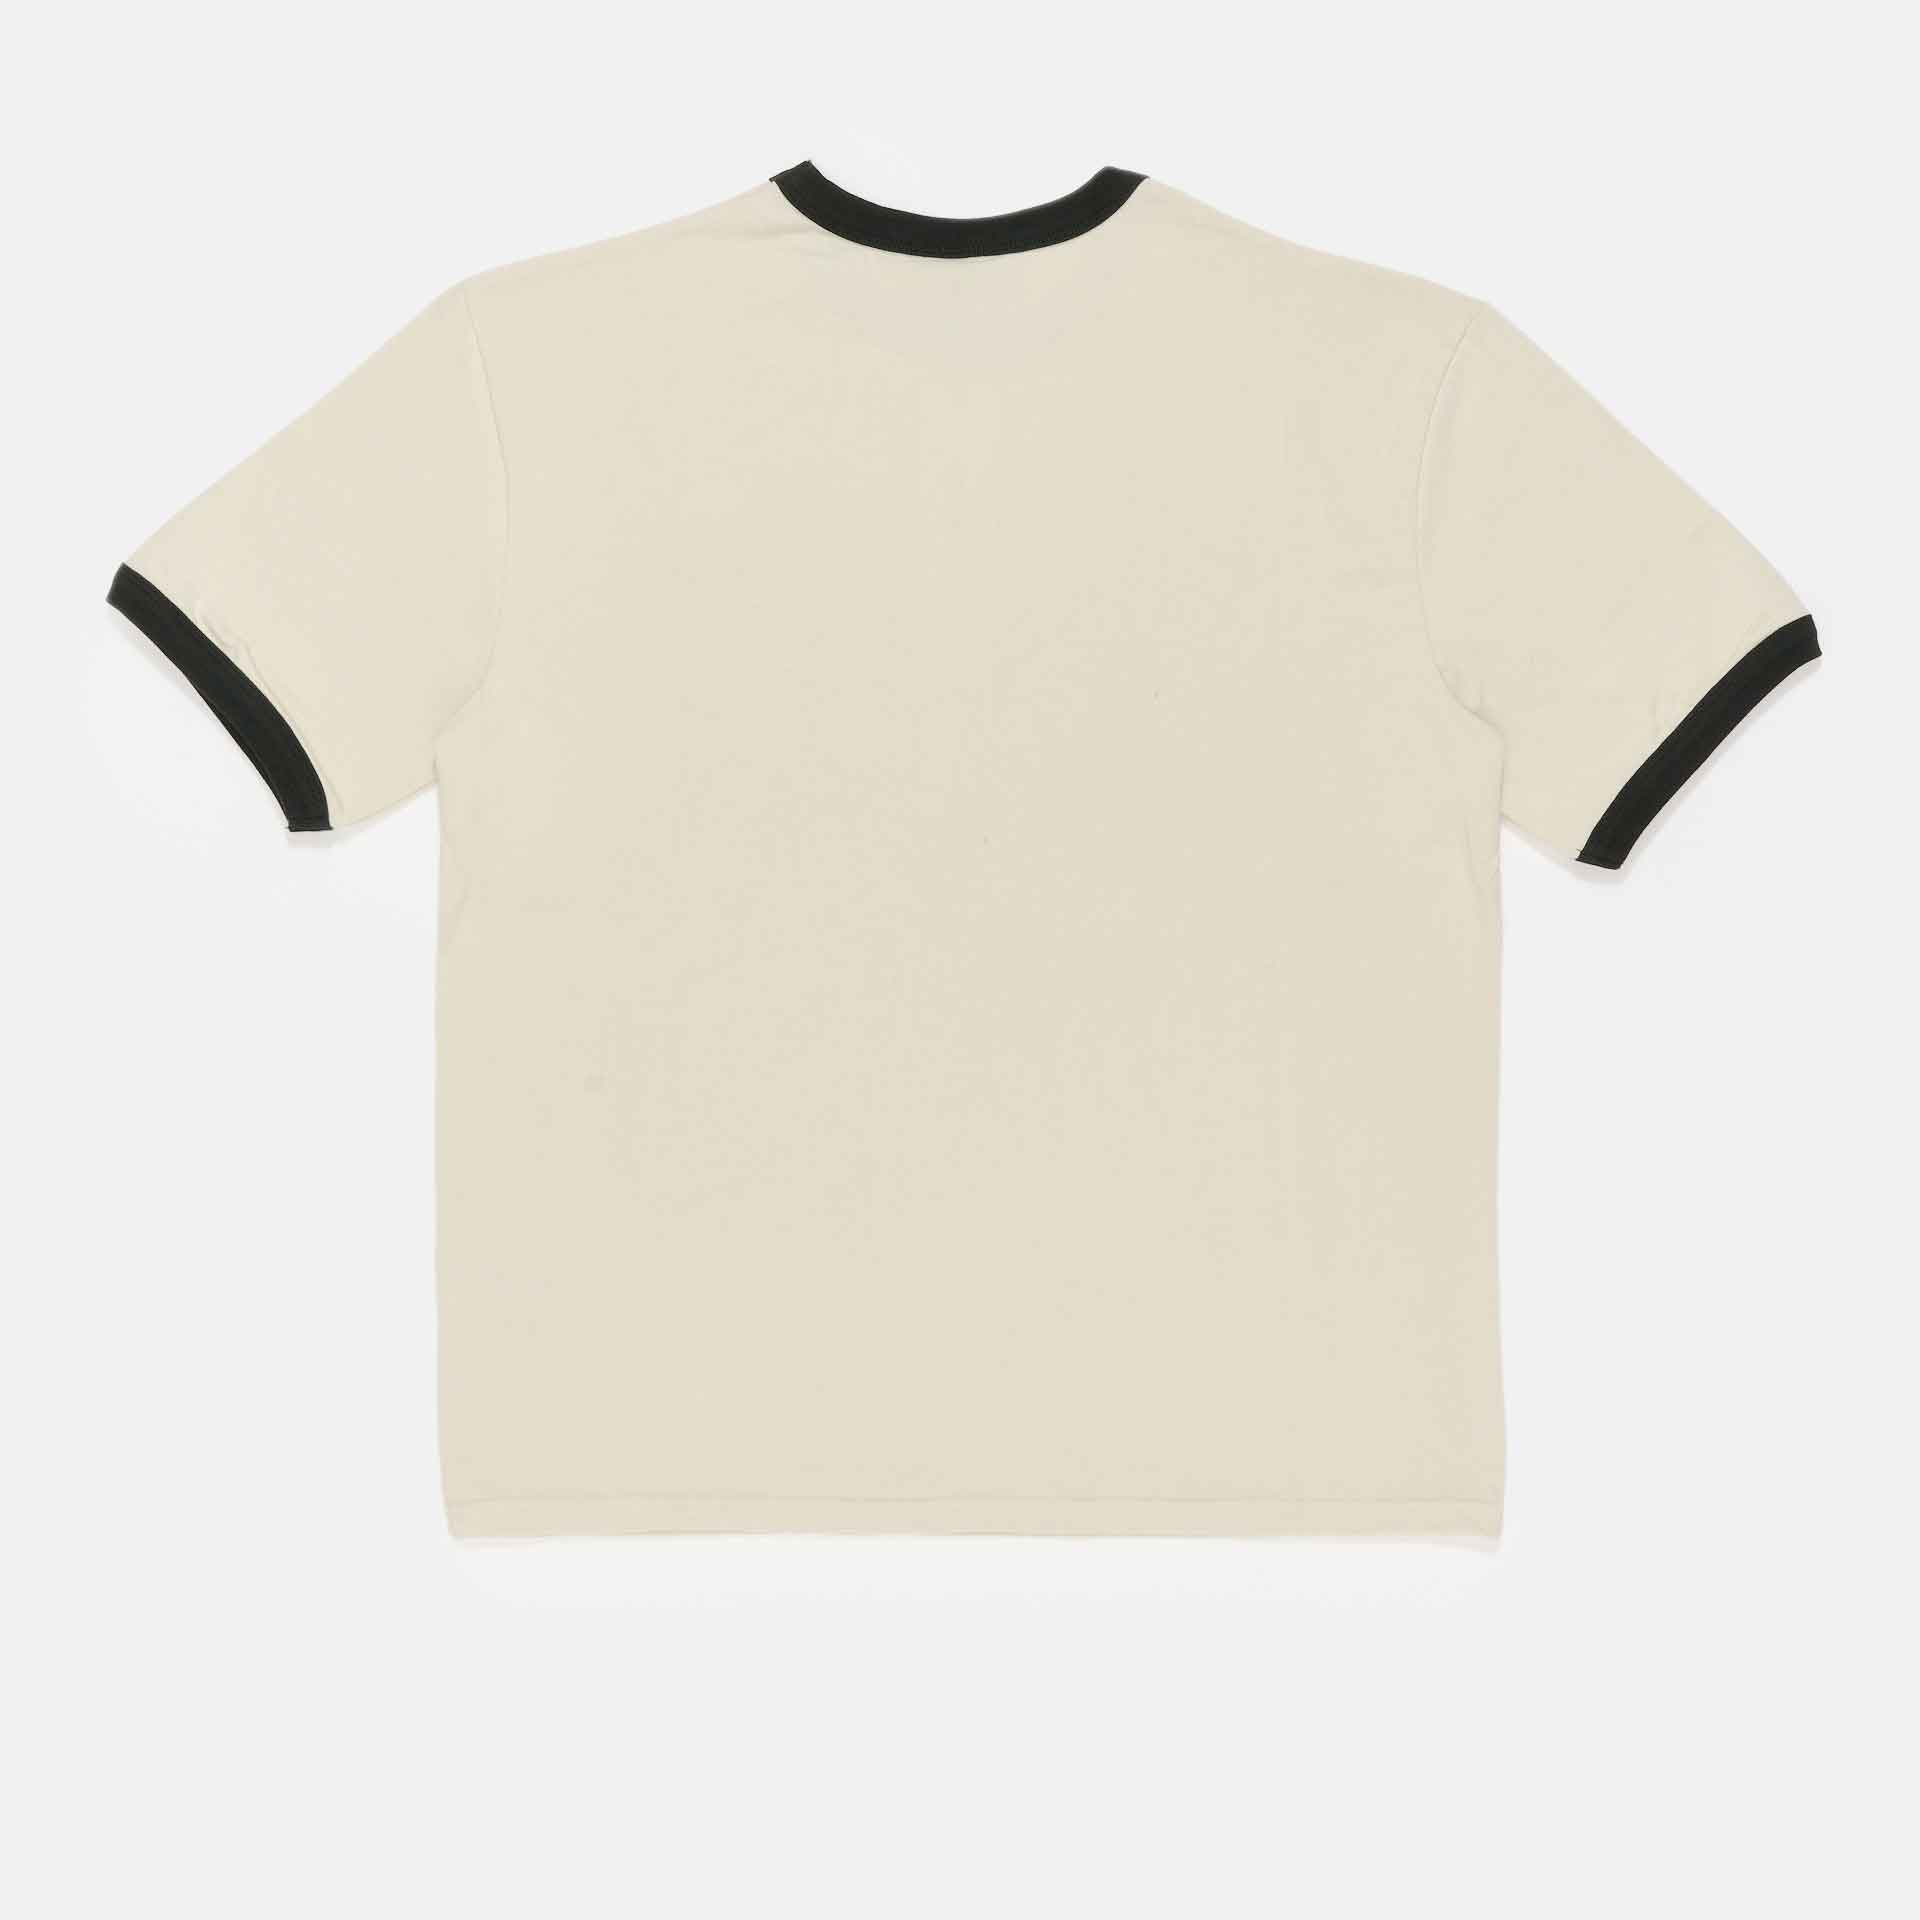 PEGADOR Trounce Oversized Ringer T-Shirt Vintage Washed Angles Cream